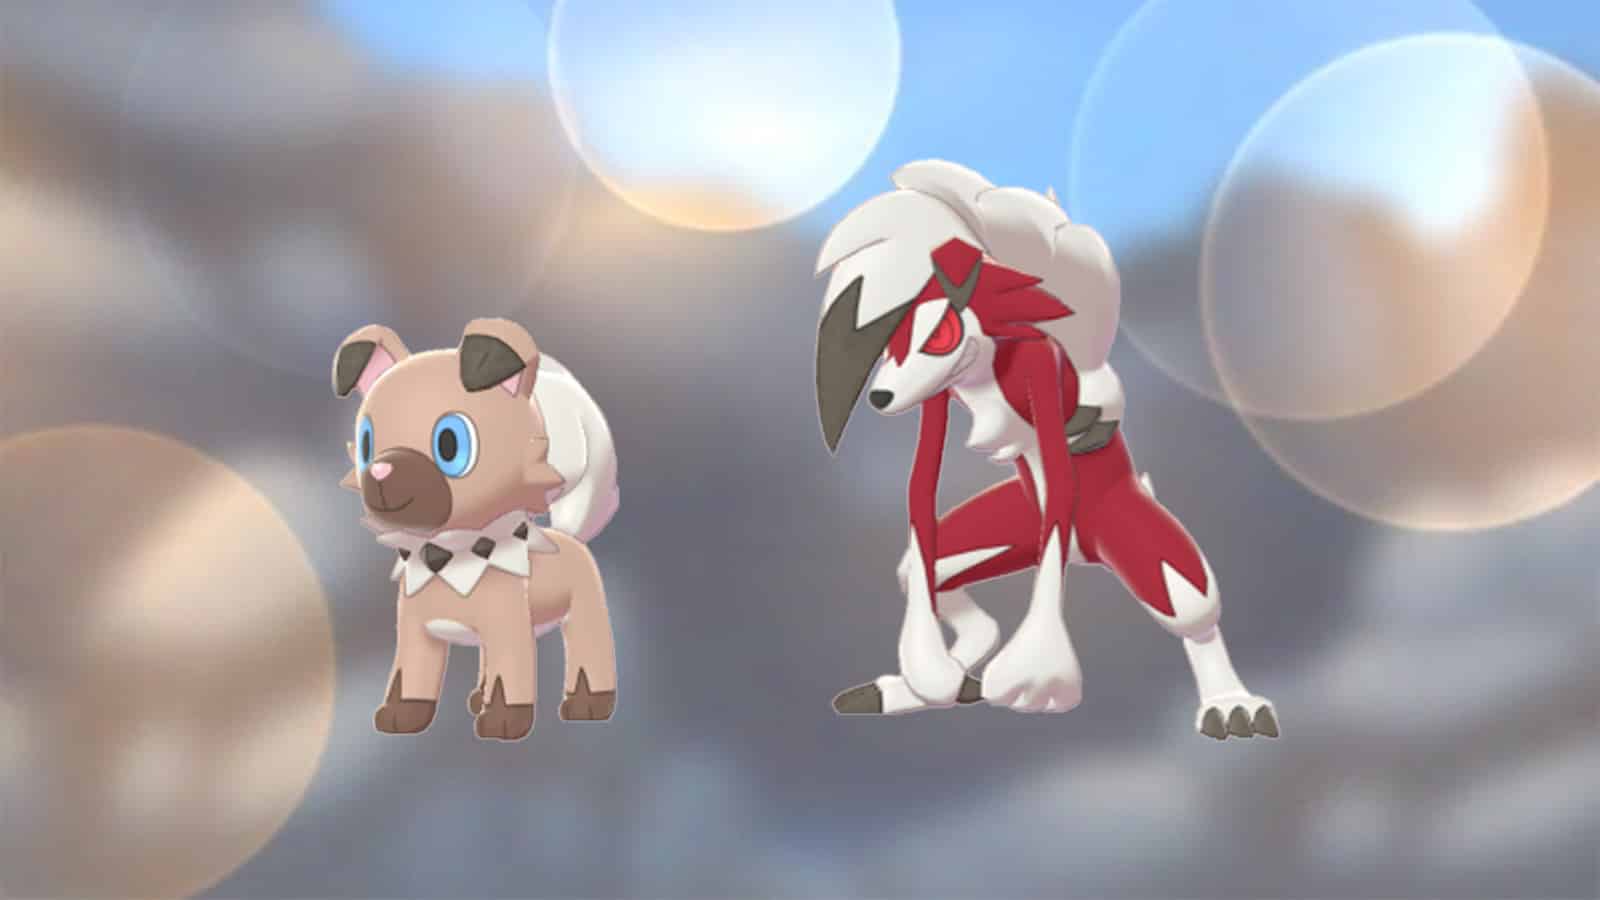 Rockruff evolving into Midnight Lycanroc - one of its two evolutions - in Pokemon Go